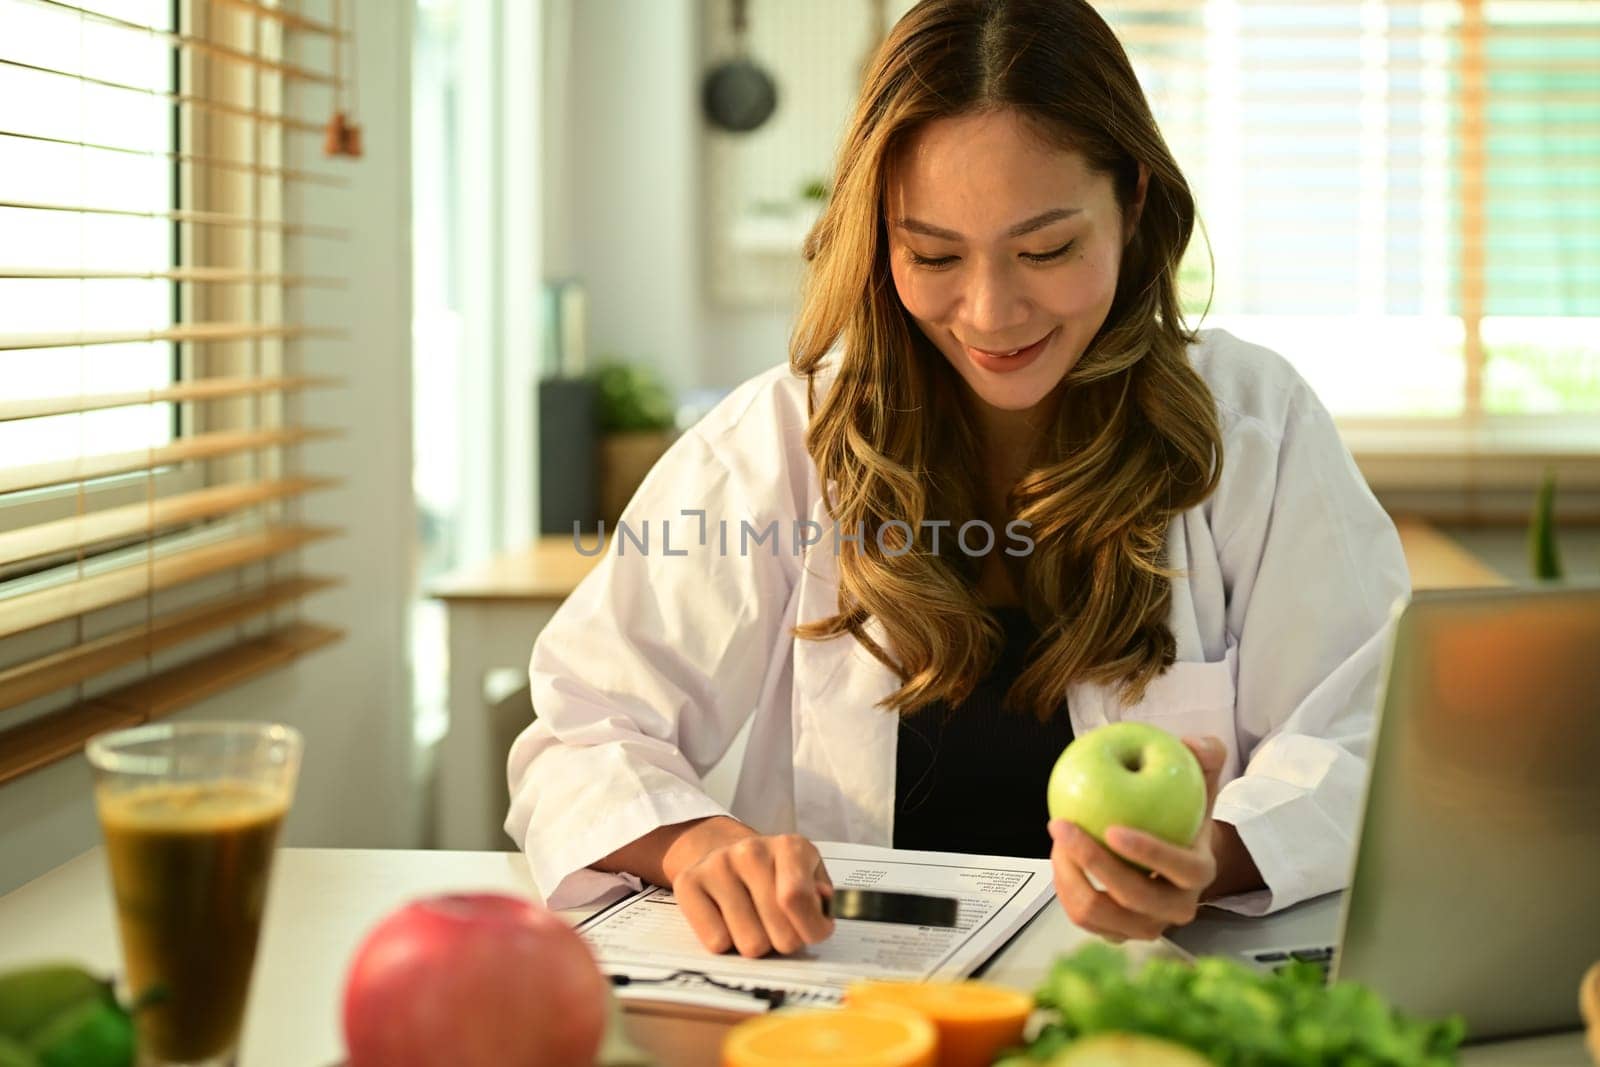 Professional nutritionist working on a diet plan, sitting with different healthy food ingredients in office. Right nutrition, healthy eating.